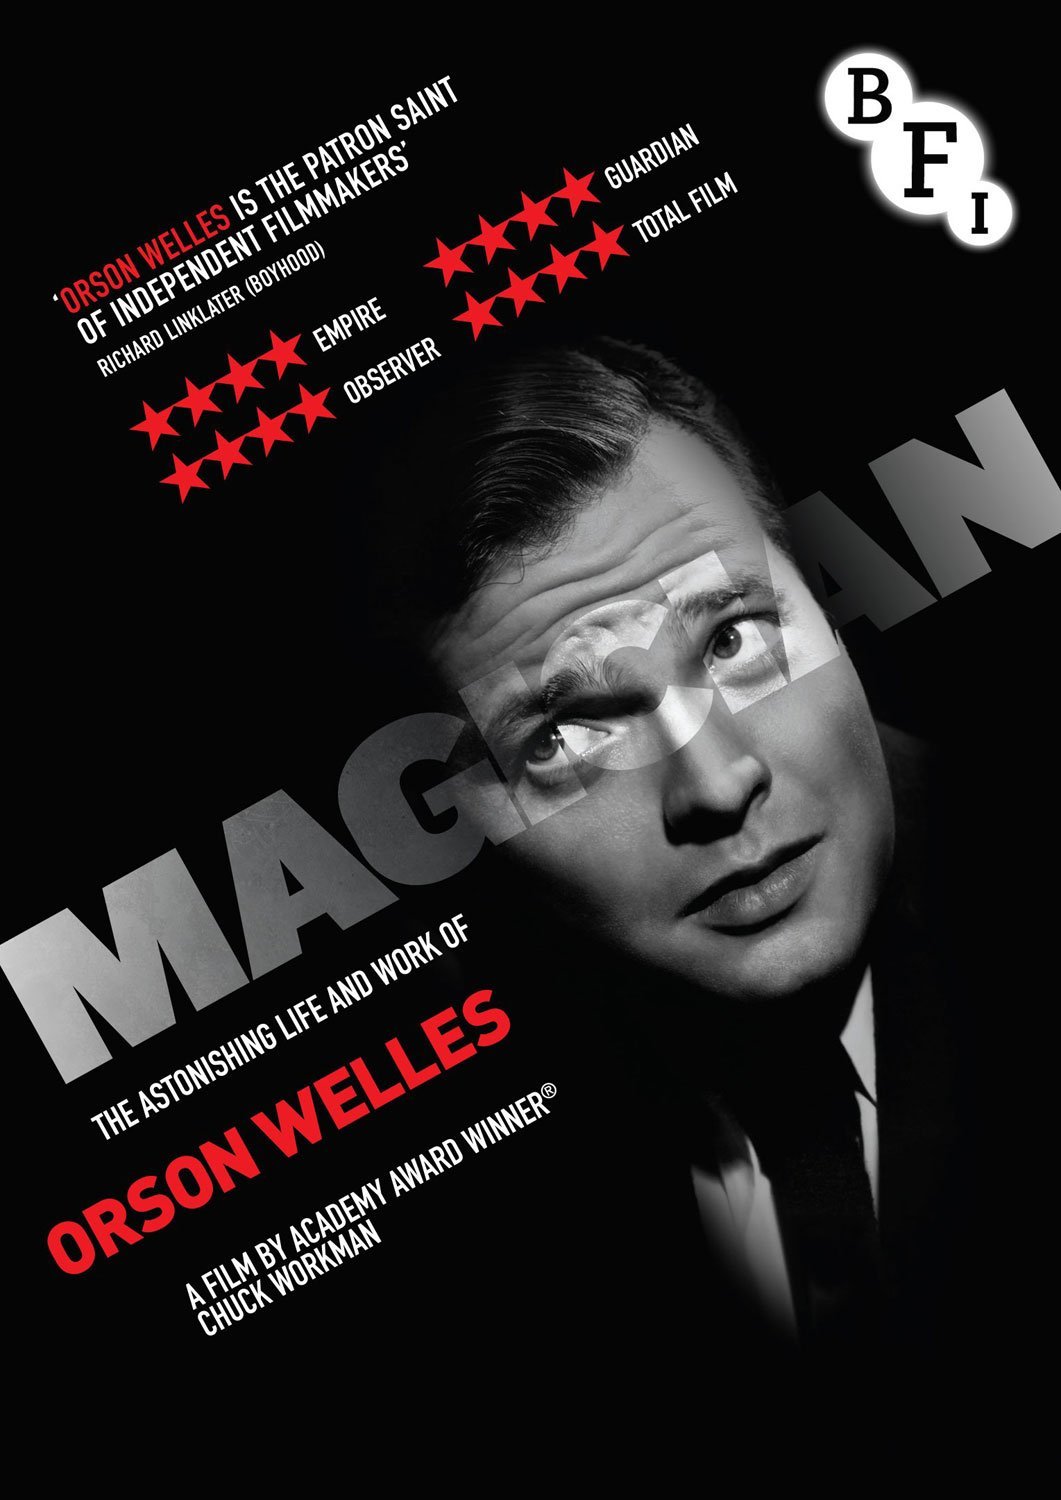 Magician - The Astonishing Life and Work of Orson Welles | Chuck Workman